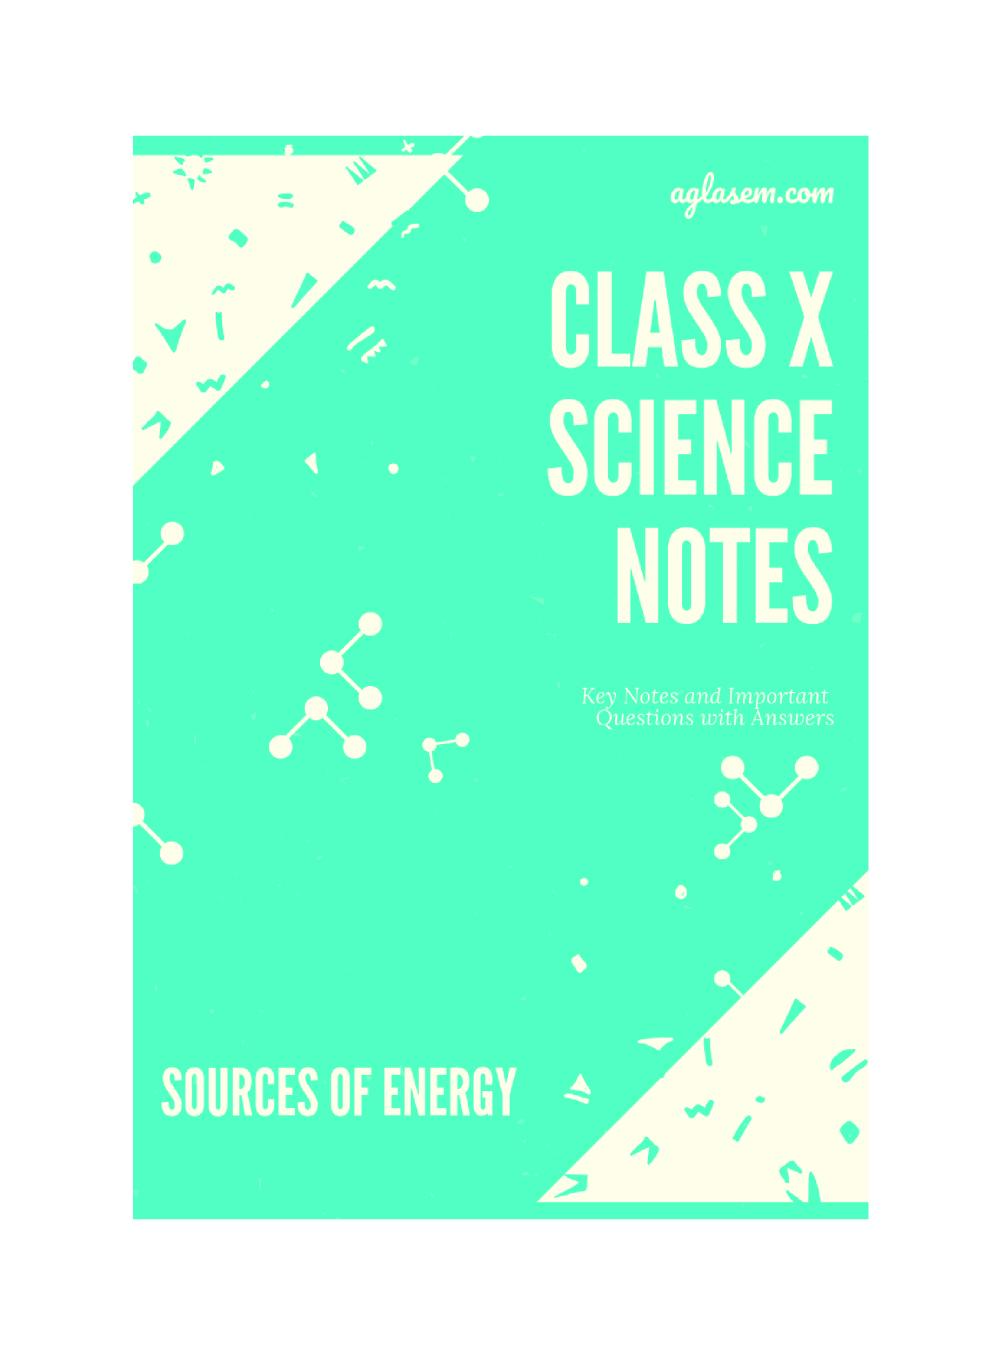 Class 10 Science Notes for Sources of Energy - Page 1